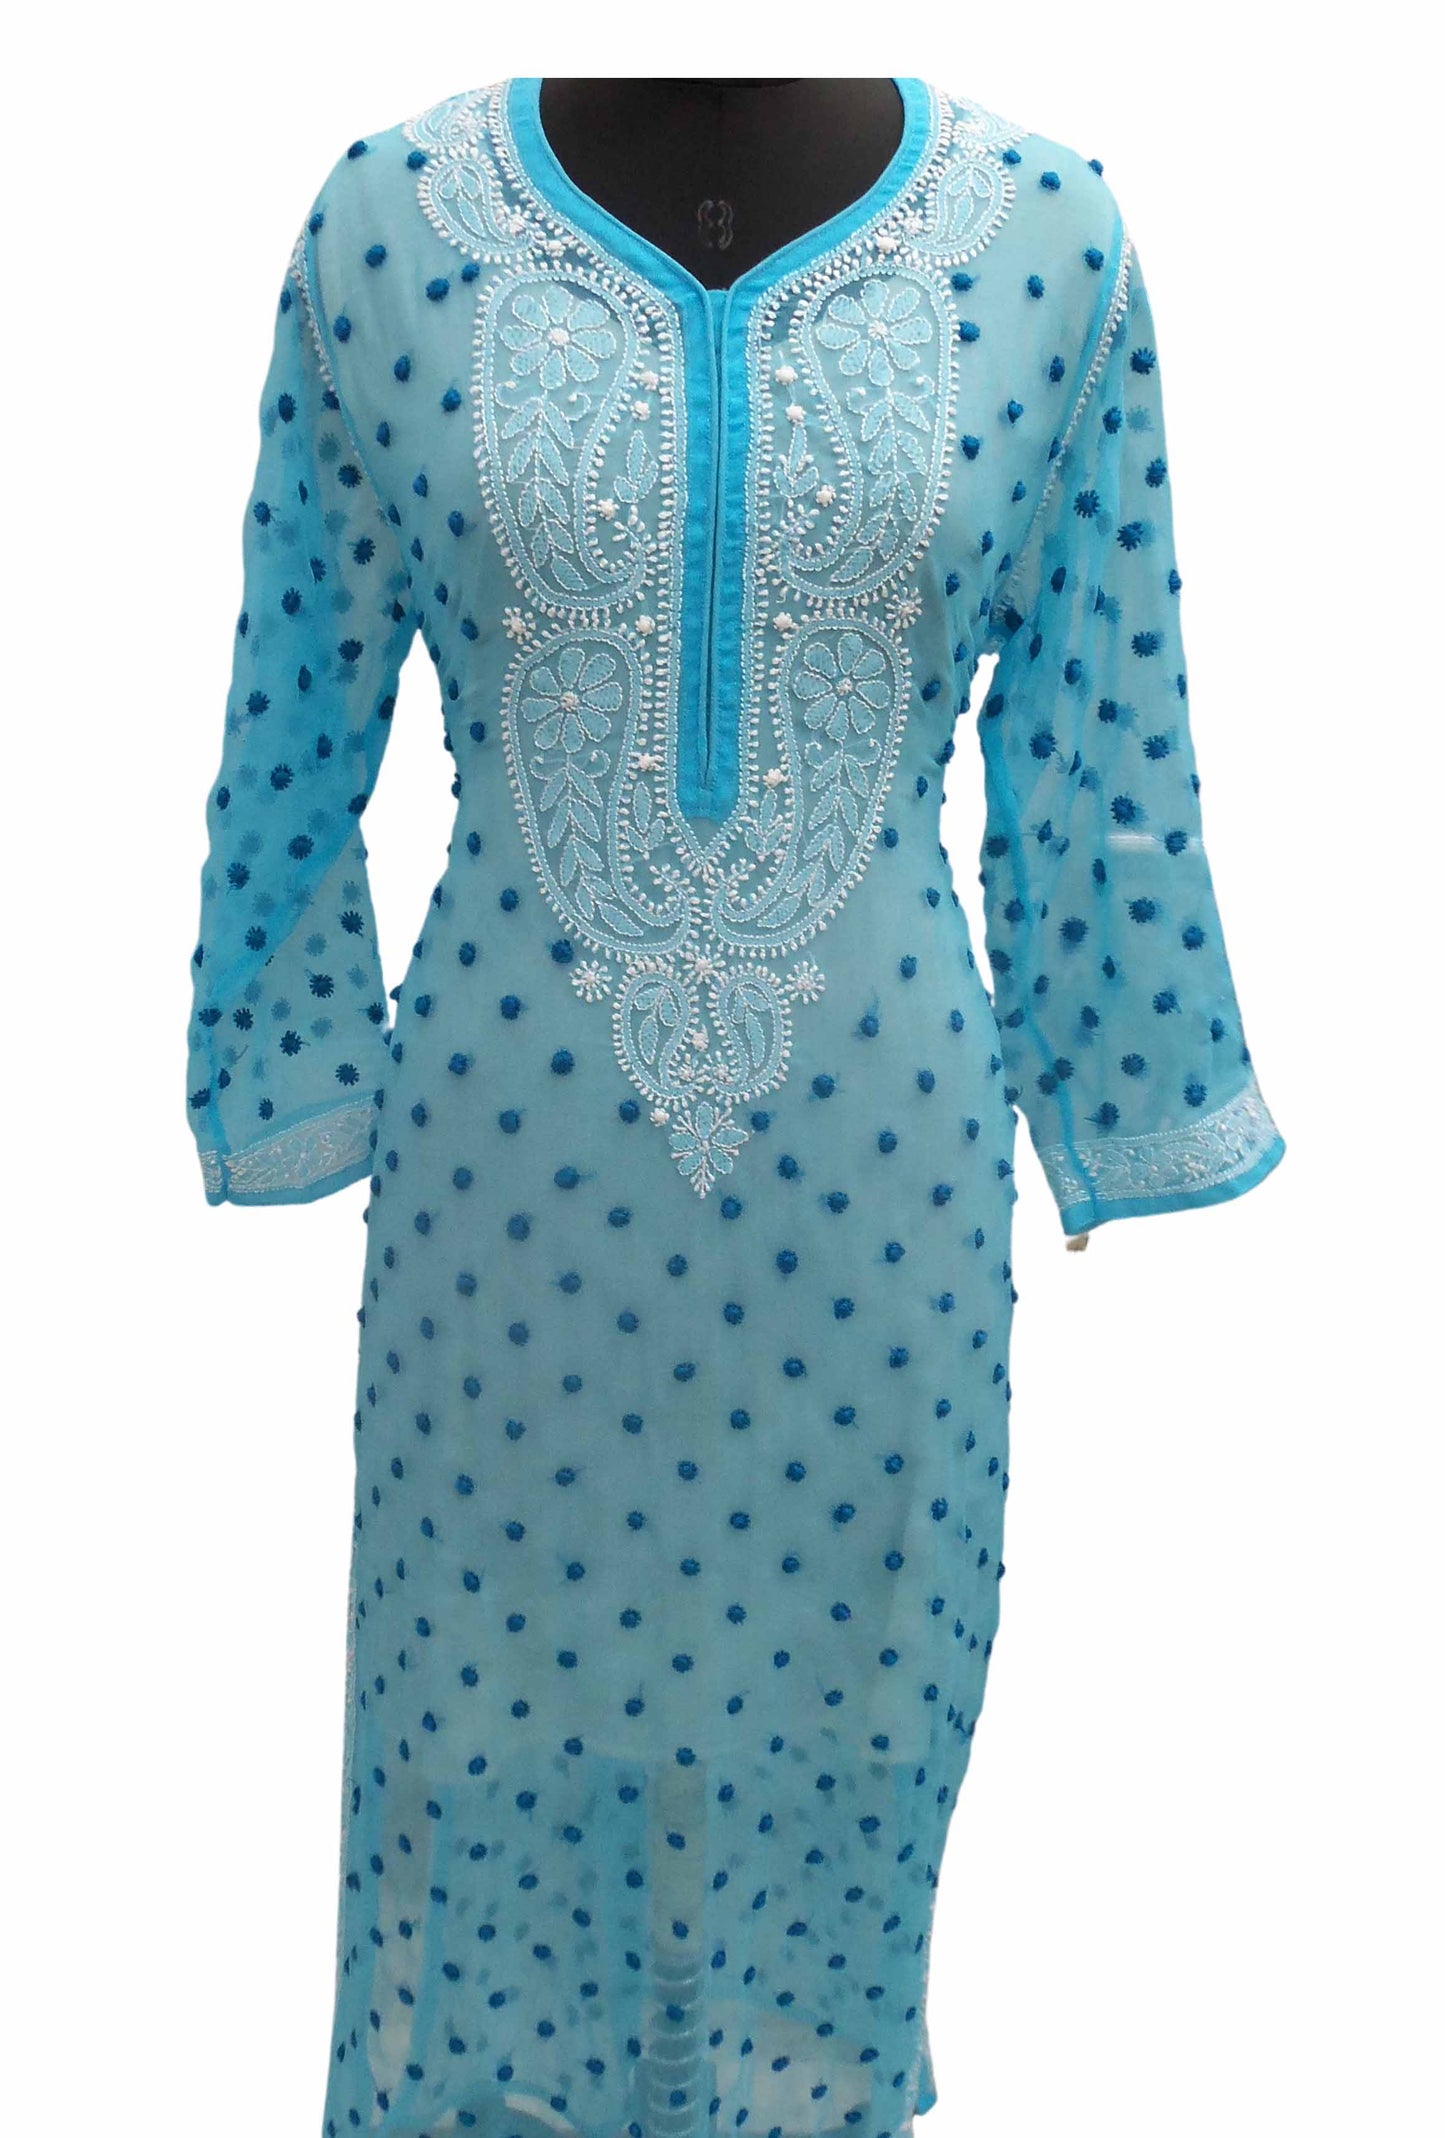 Shyamal Chikan Hand Embroidered Light Blue Georgette Lucknowi Chikankari All-Over Kurti - S12209